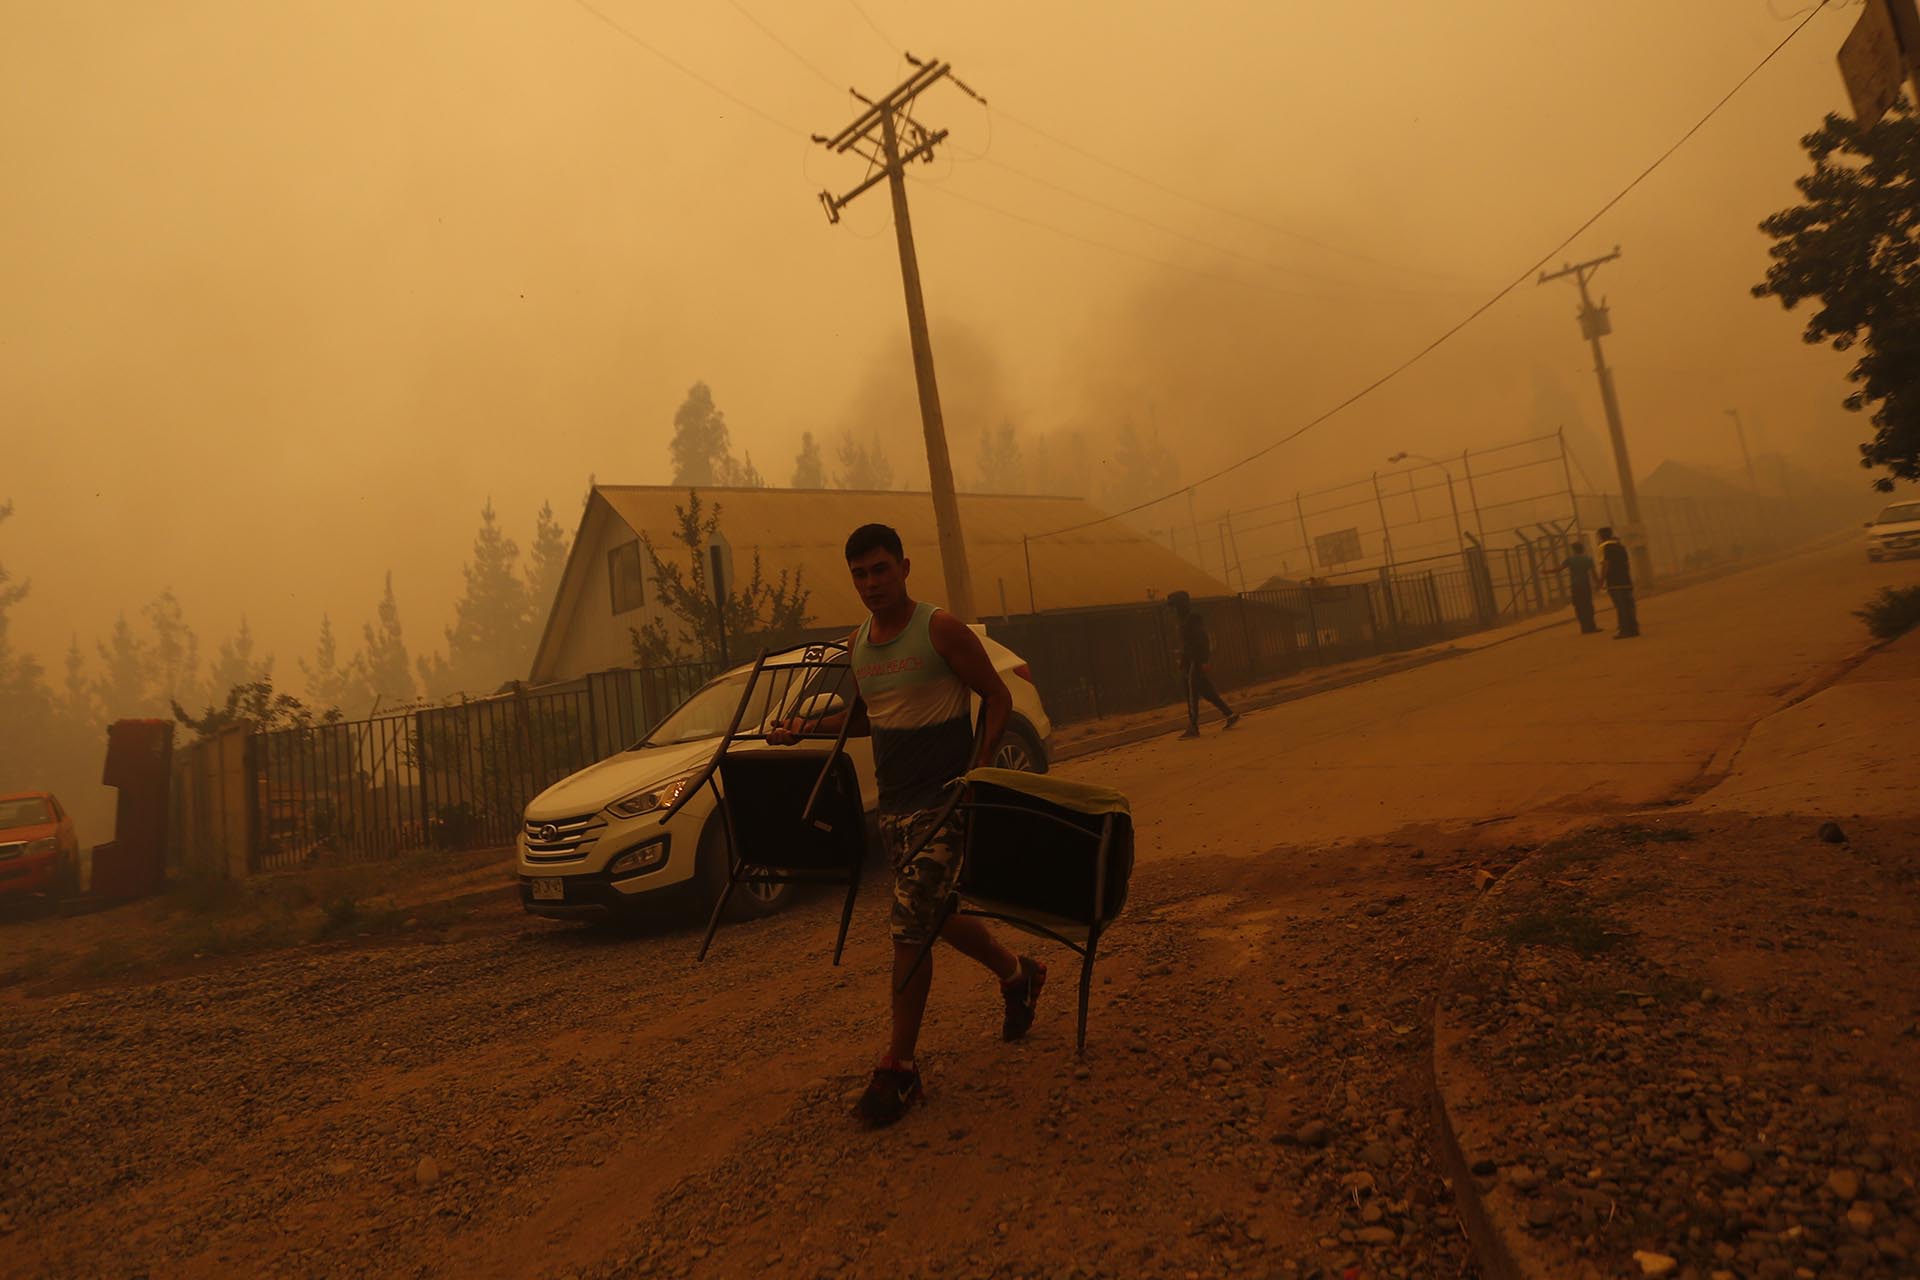 A young man evacuates carrying chairs in San Ramon after a forest fire devastated the nearby town of Santa Olga, 240 kilometres south of Santiago, on January 26, 2017. Six people -- among them four firefighters and two police -- have now been killed battling vast forest fires in central Chile, officials said Wednesday. Multiple blazes have ravaged 238,000 hectares (588,000 acres) and are growing, the National Forestry Corporation said in a statement. / AFP PHOTO / PABLO VERA LISPERGUER